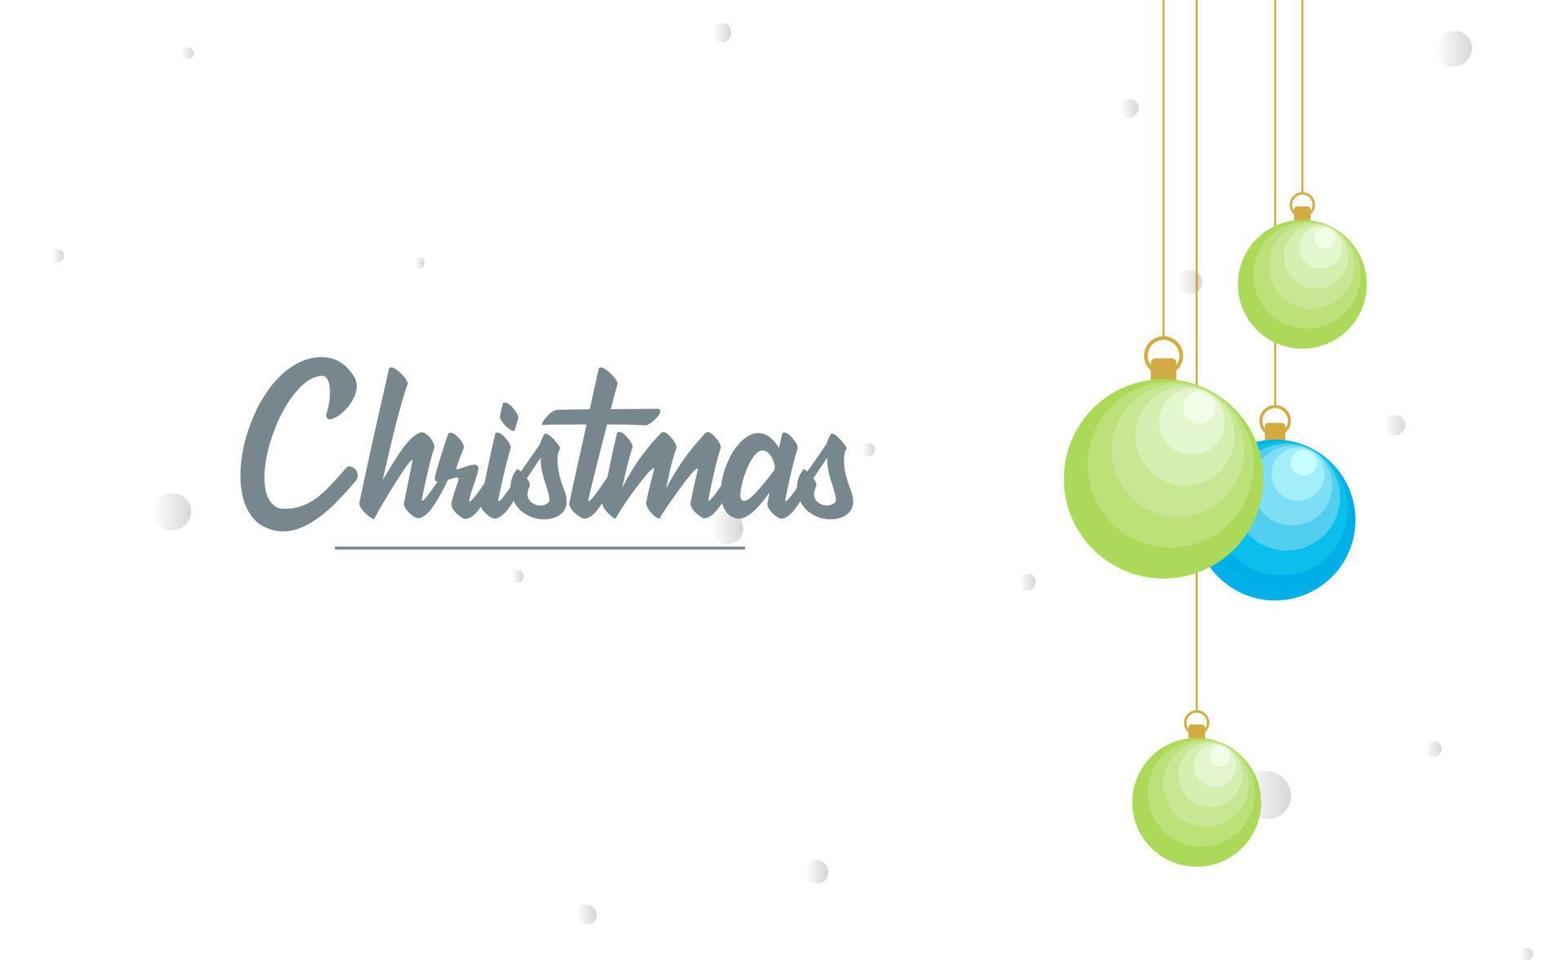 Flat merry christmas Glossy  decorative Ball elements hanging background vector